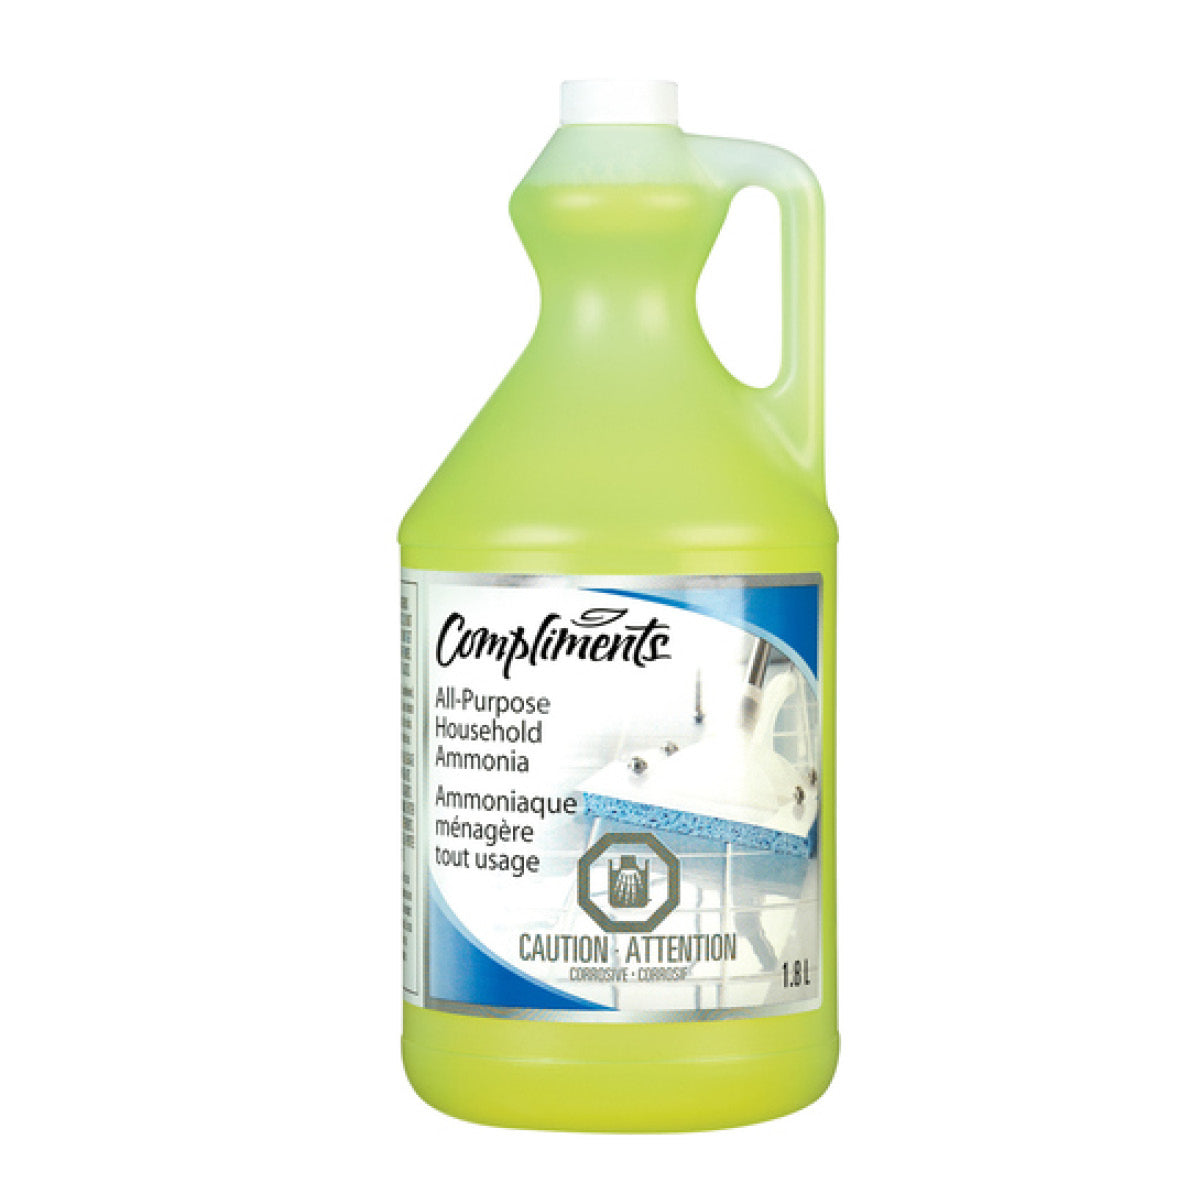 Compliments Ammonia All-Purpose Cleaner, 1.8 L